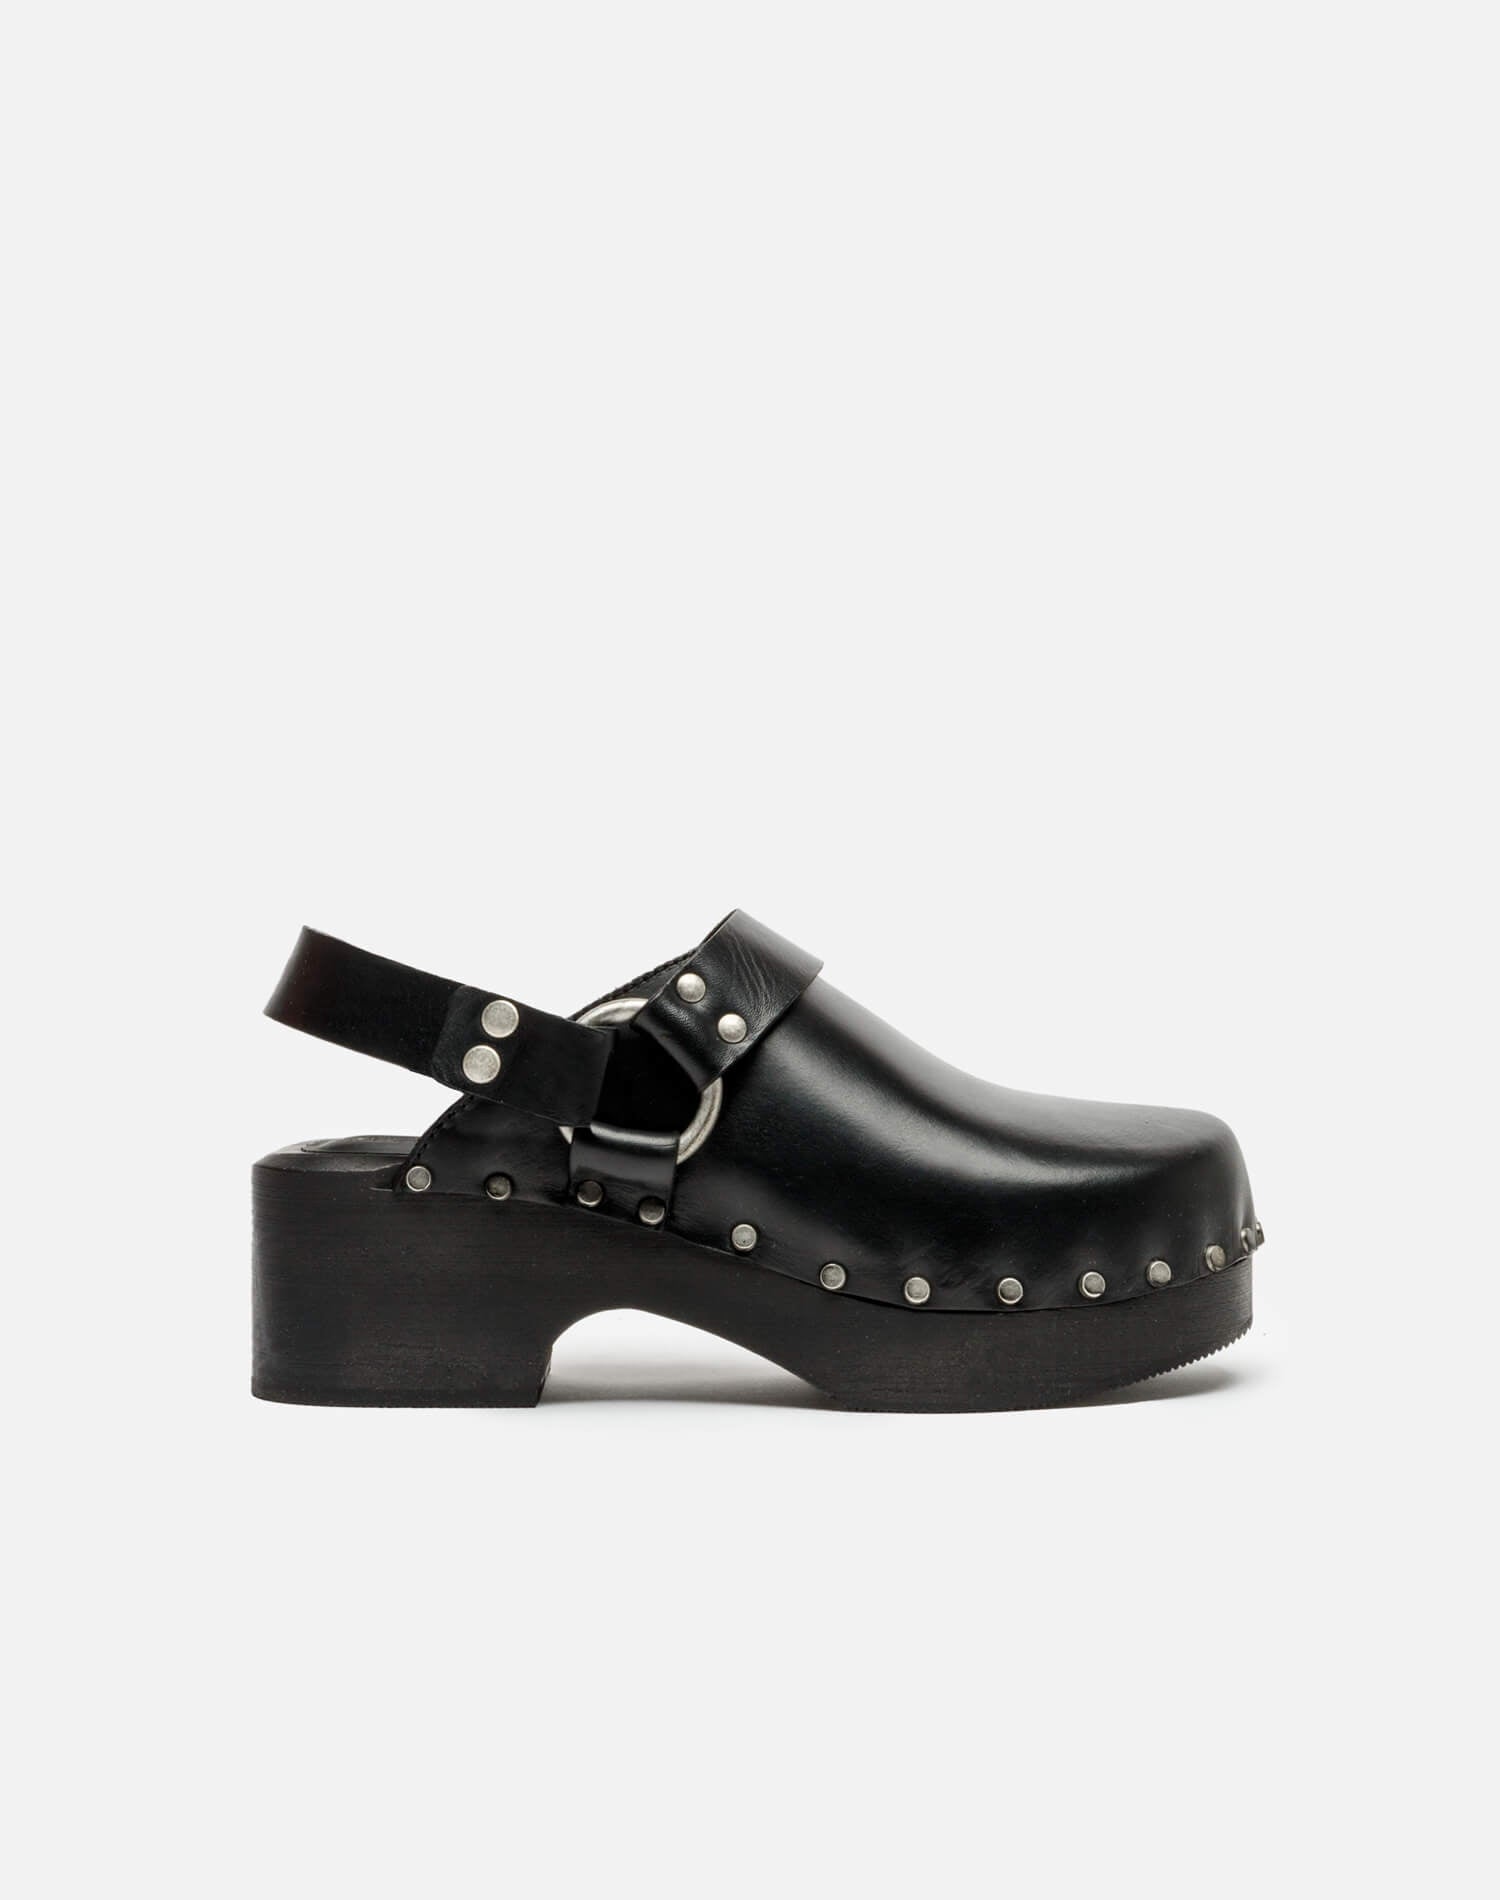 RE/DONE | 70s Studded Slingback Clog in Worn Black Leather